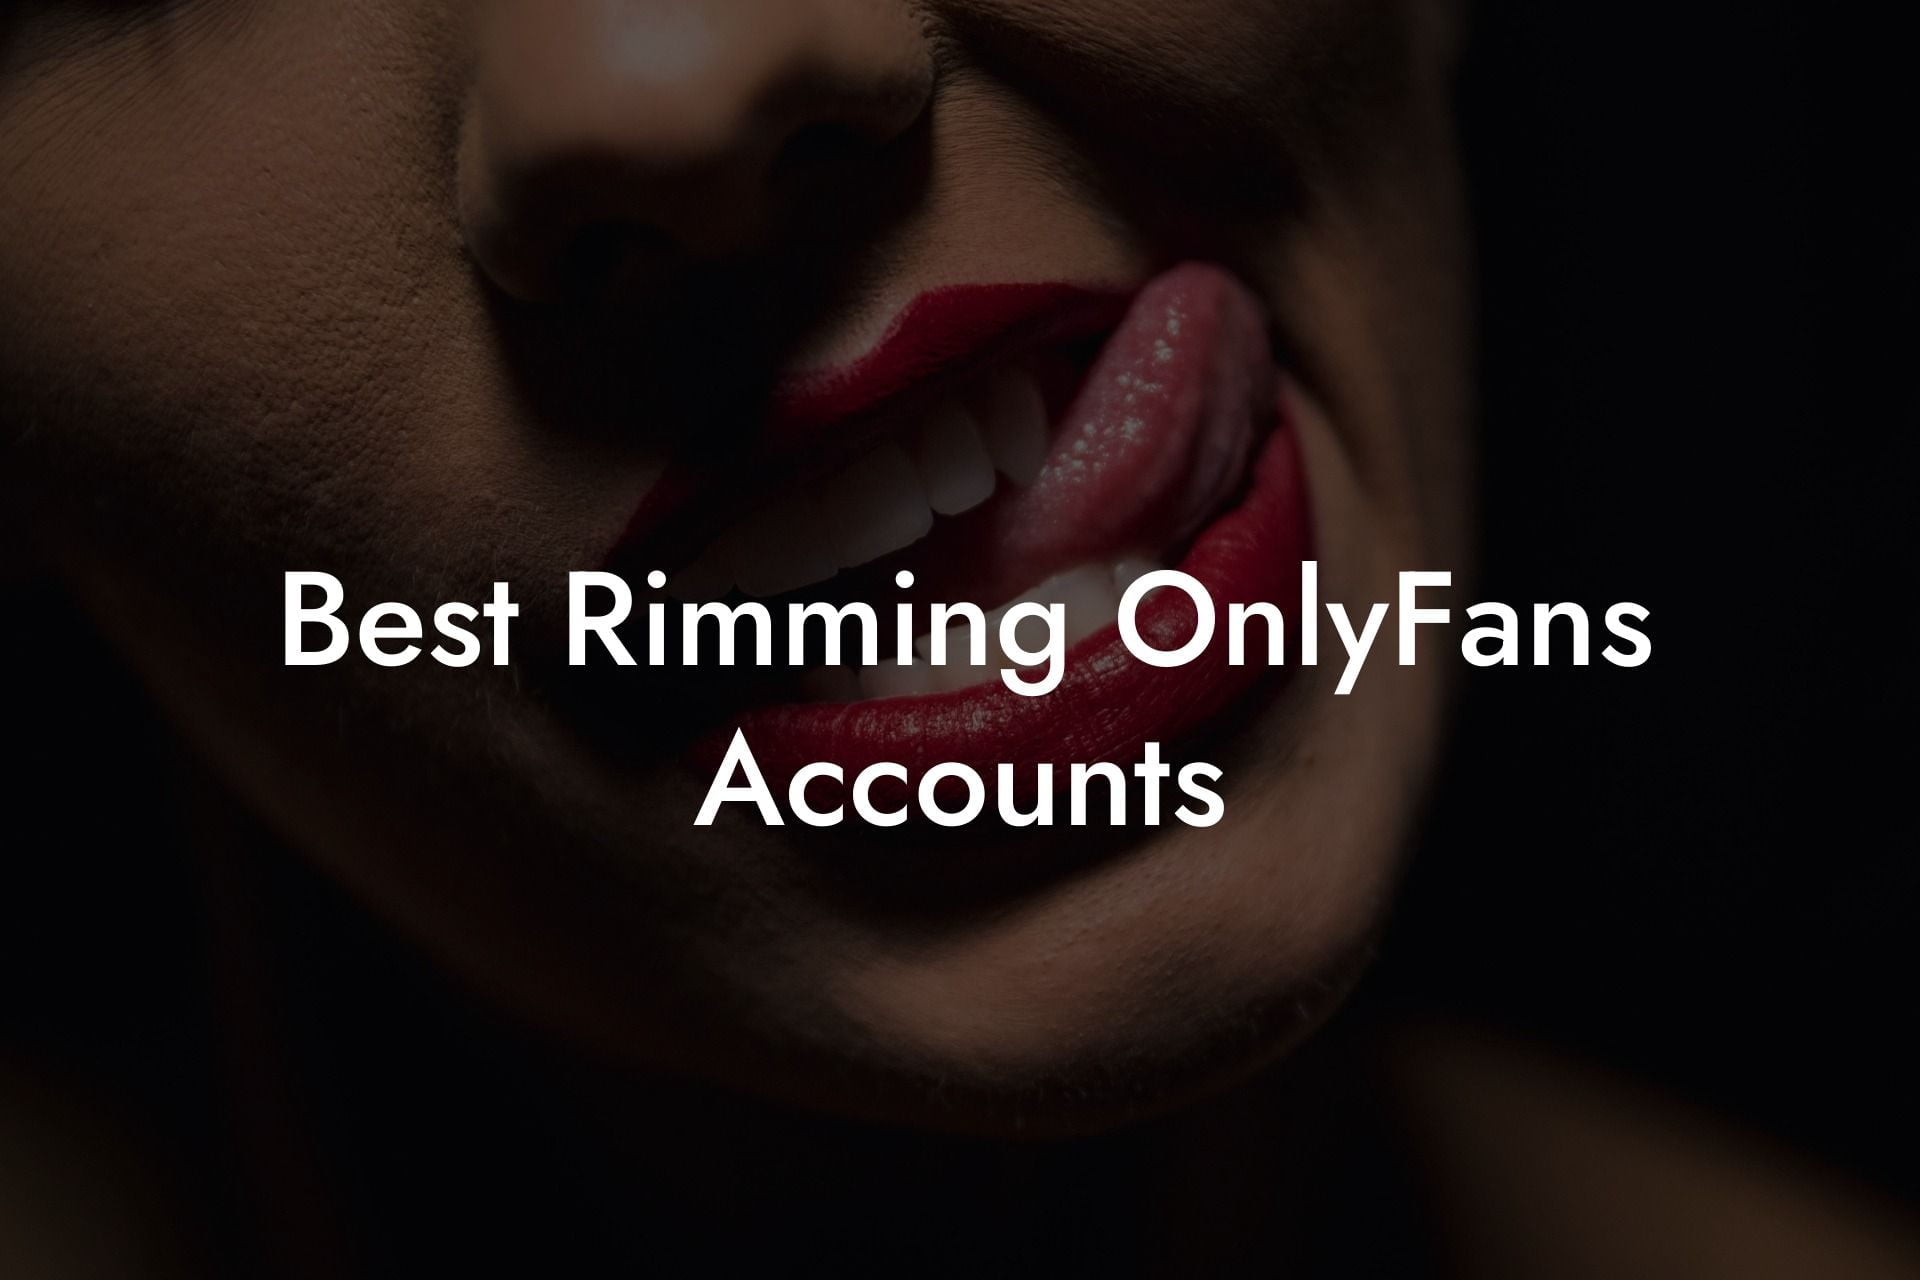 Best Rimming OnlyFans Accounts